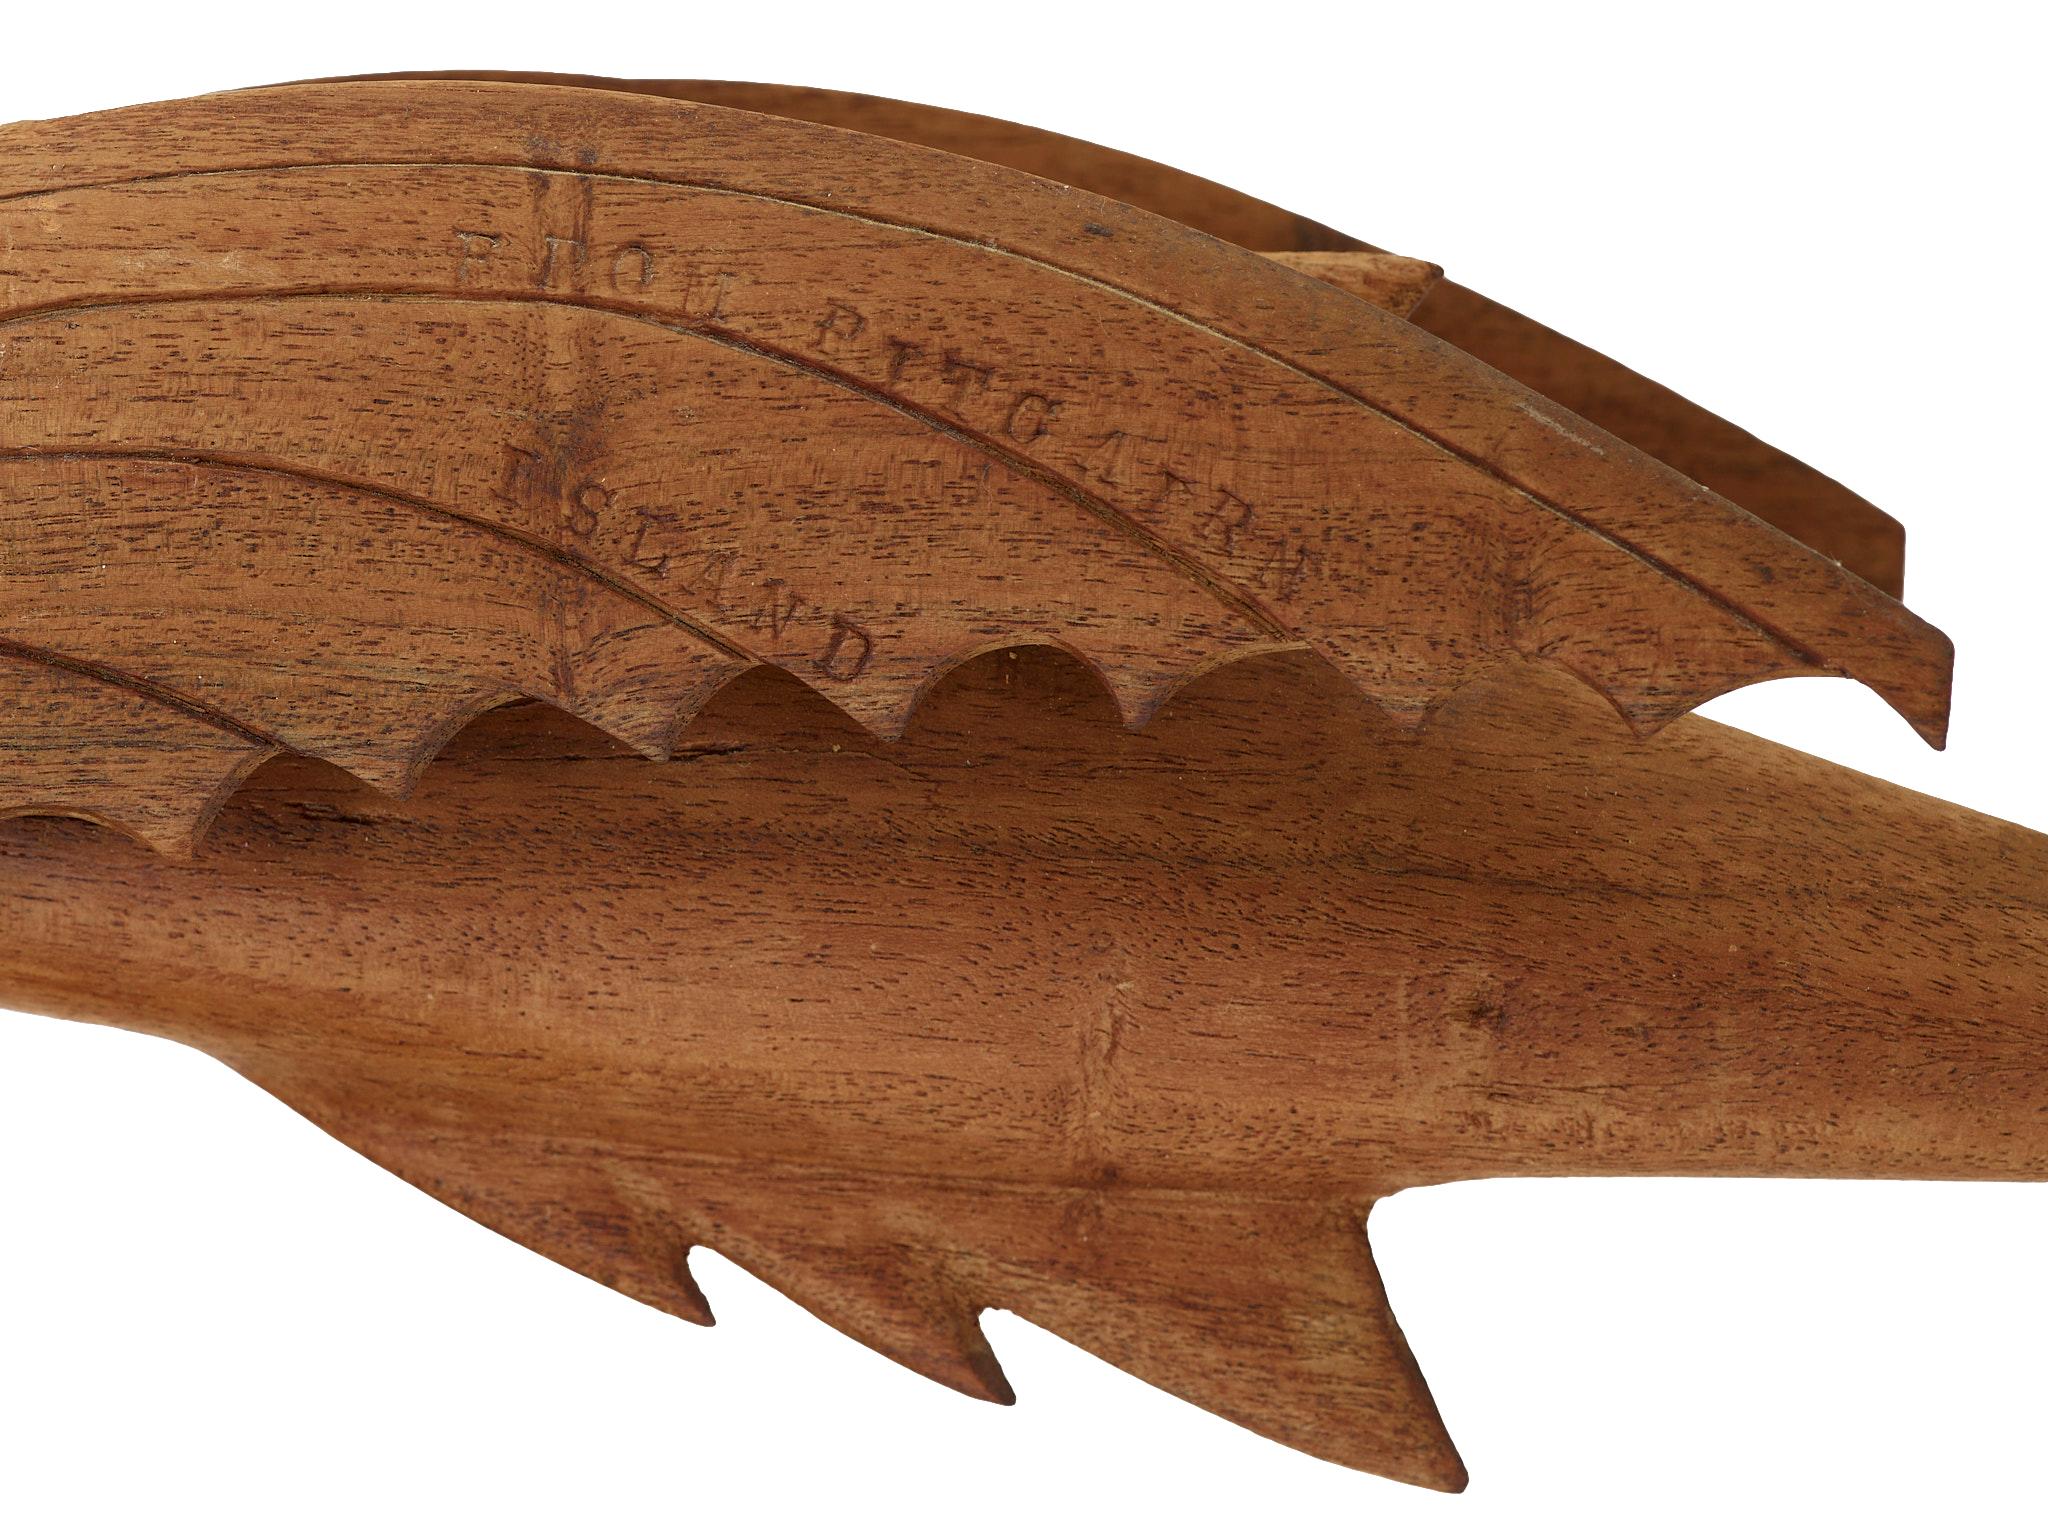 Pitcairn Islands carved wooden flying fish
Marked ‘From Pitcairn Island Made by Calvert Warren’, descendant of H.M.S. Bounty mutineers. On original stand with punch mark decoration. Circa 1920
L 54, w 11 , h 18cm. South Pacific